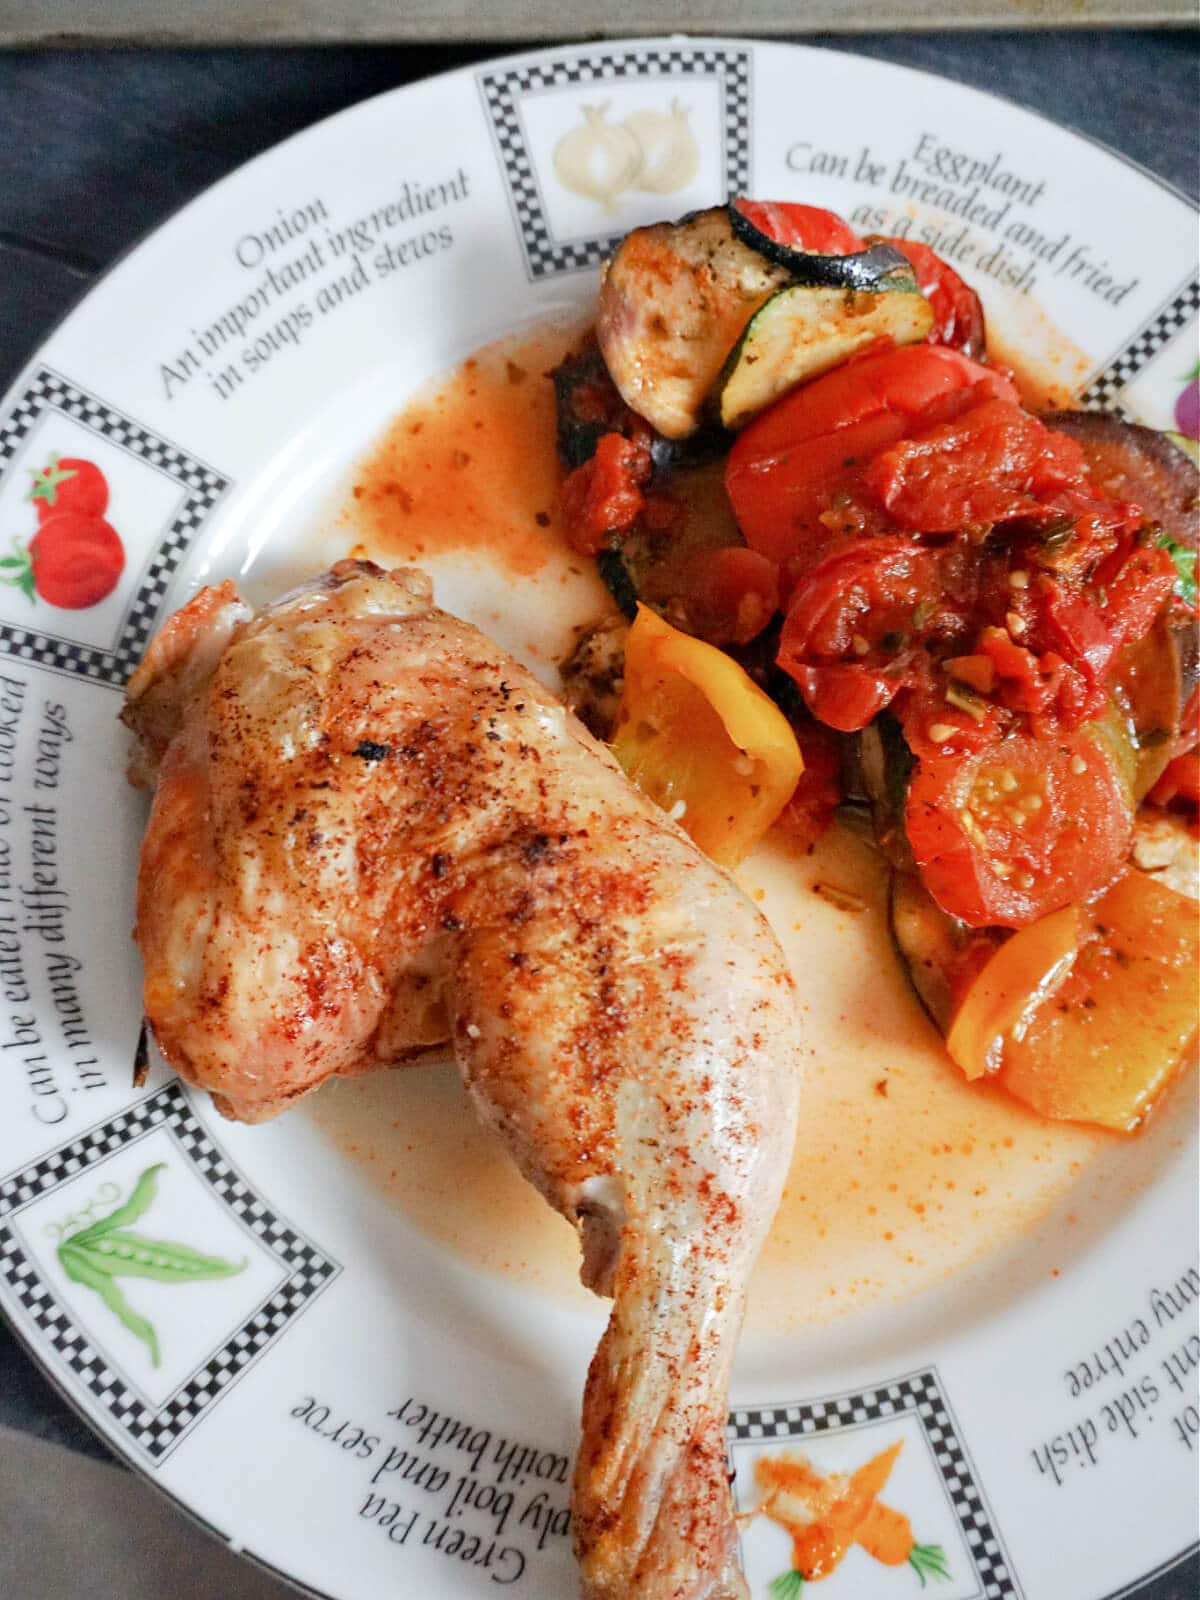 Overhead shot of a plate with a roasted chicken leg and ratatouille